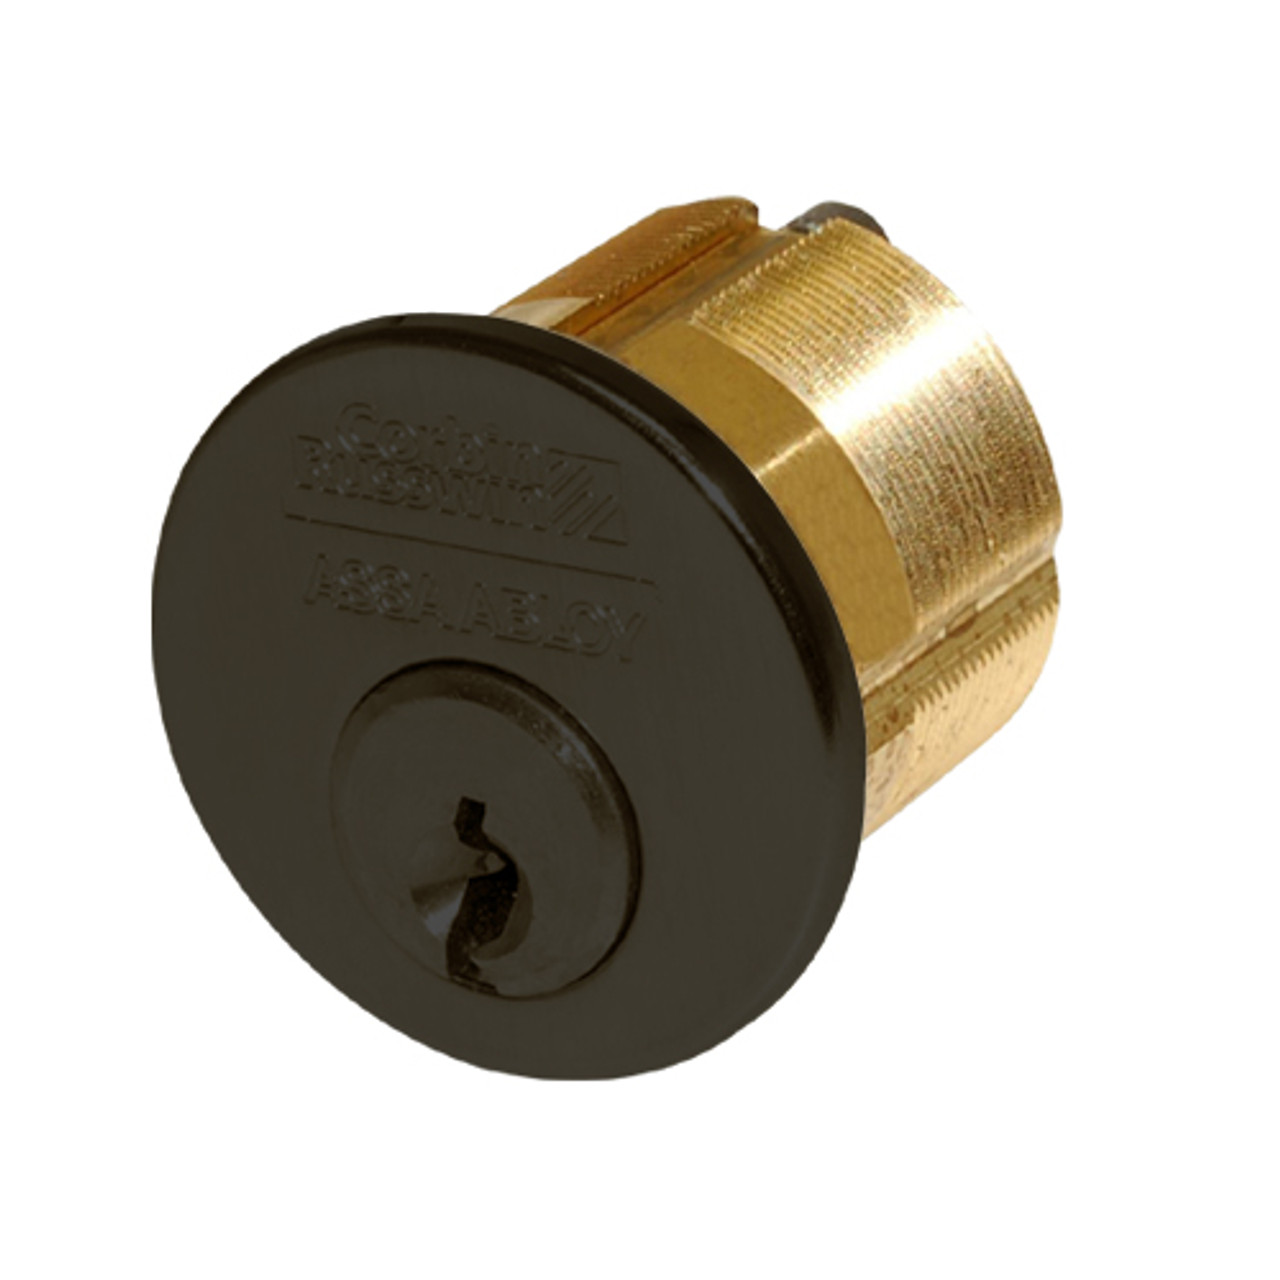 CR1000-114-A06-6-H2-613 Corbin Conventional Mortise Cylinder for Mortise Lock and DL3000 Deadlocks with Schlage L9000 Cam in Oil Rubbed Bronze Finish